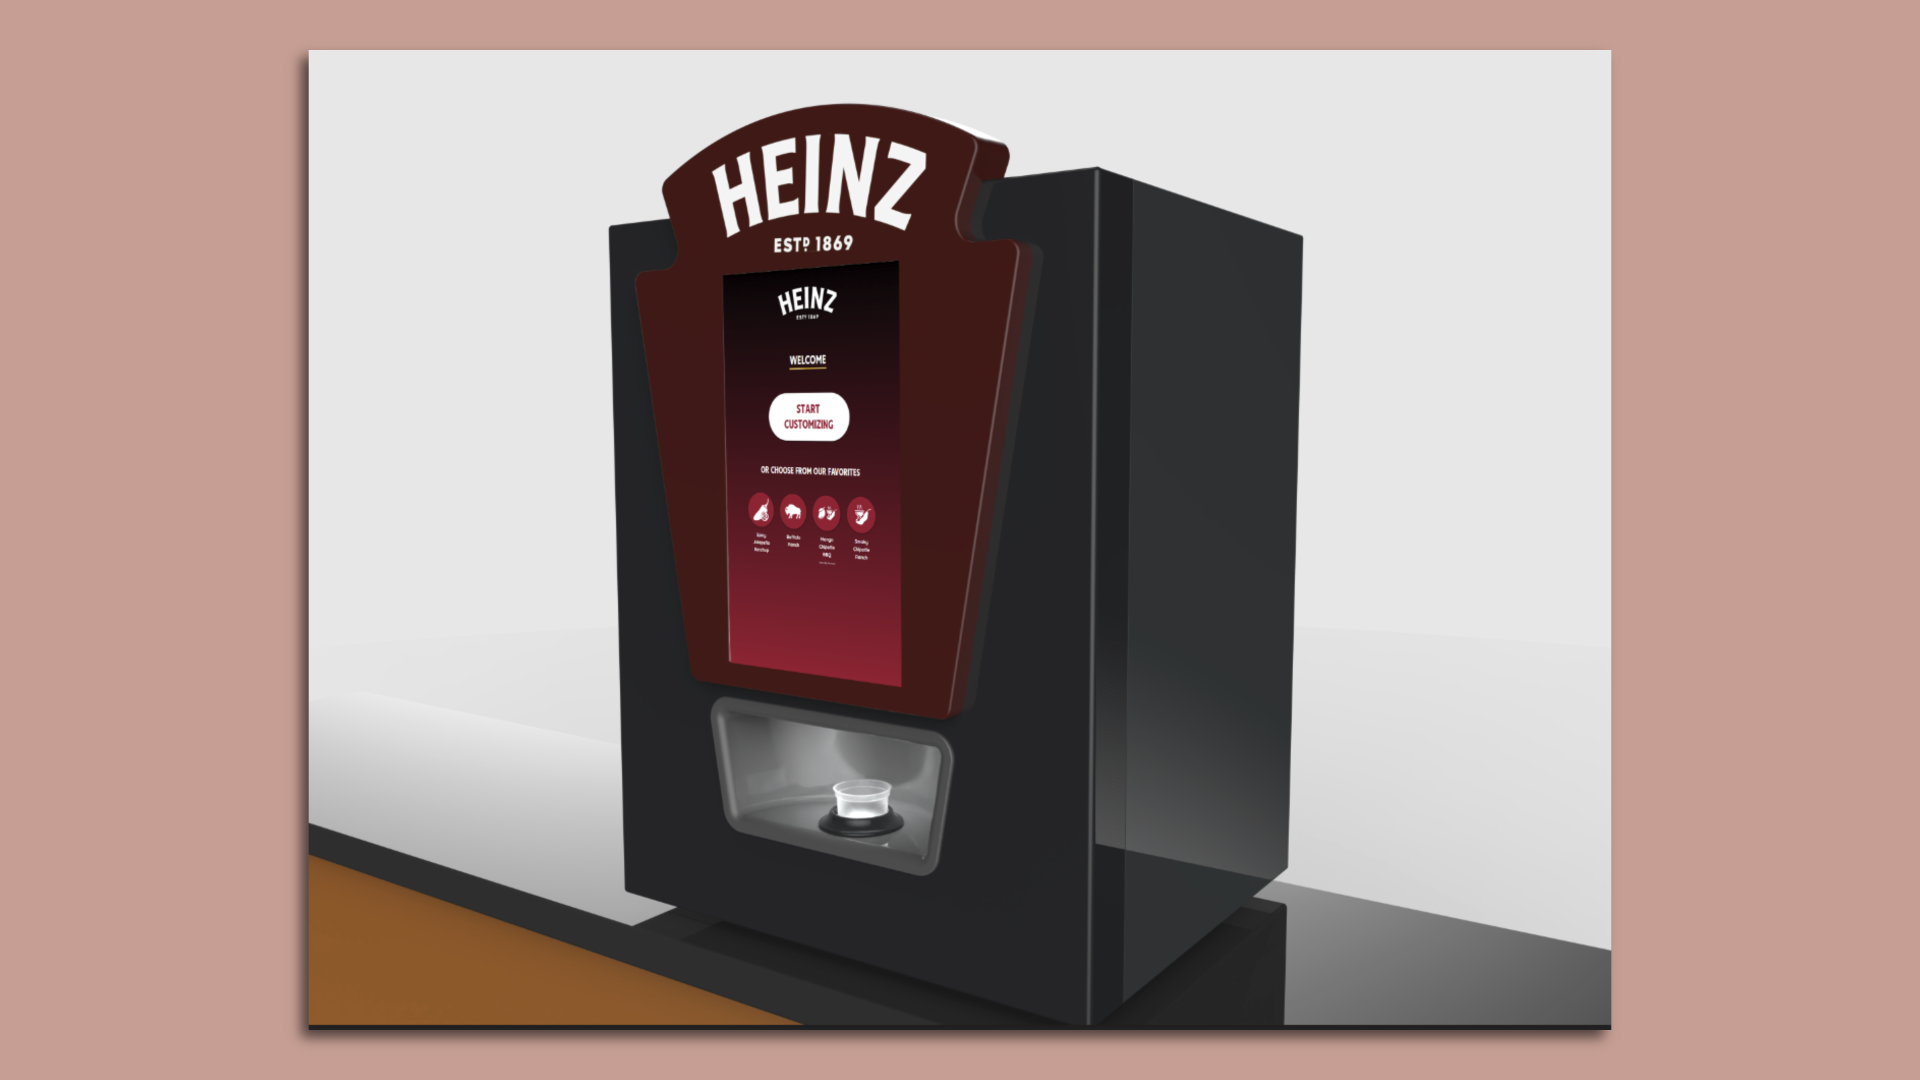 A vending machine for ketchup that says "Heinz" at the top.